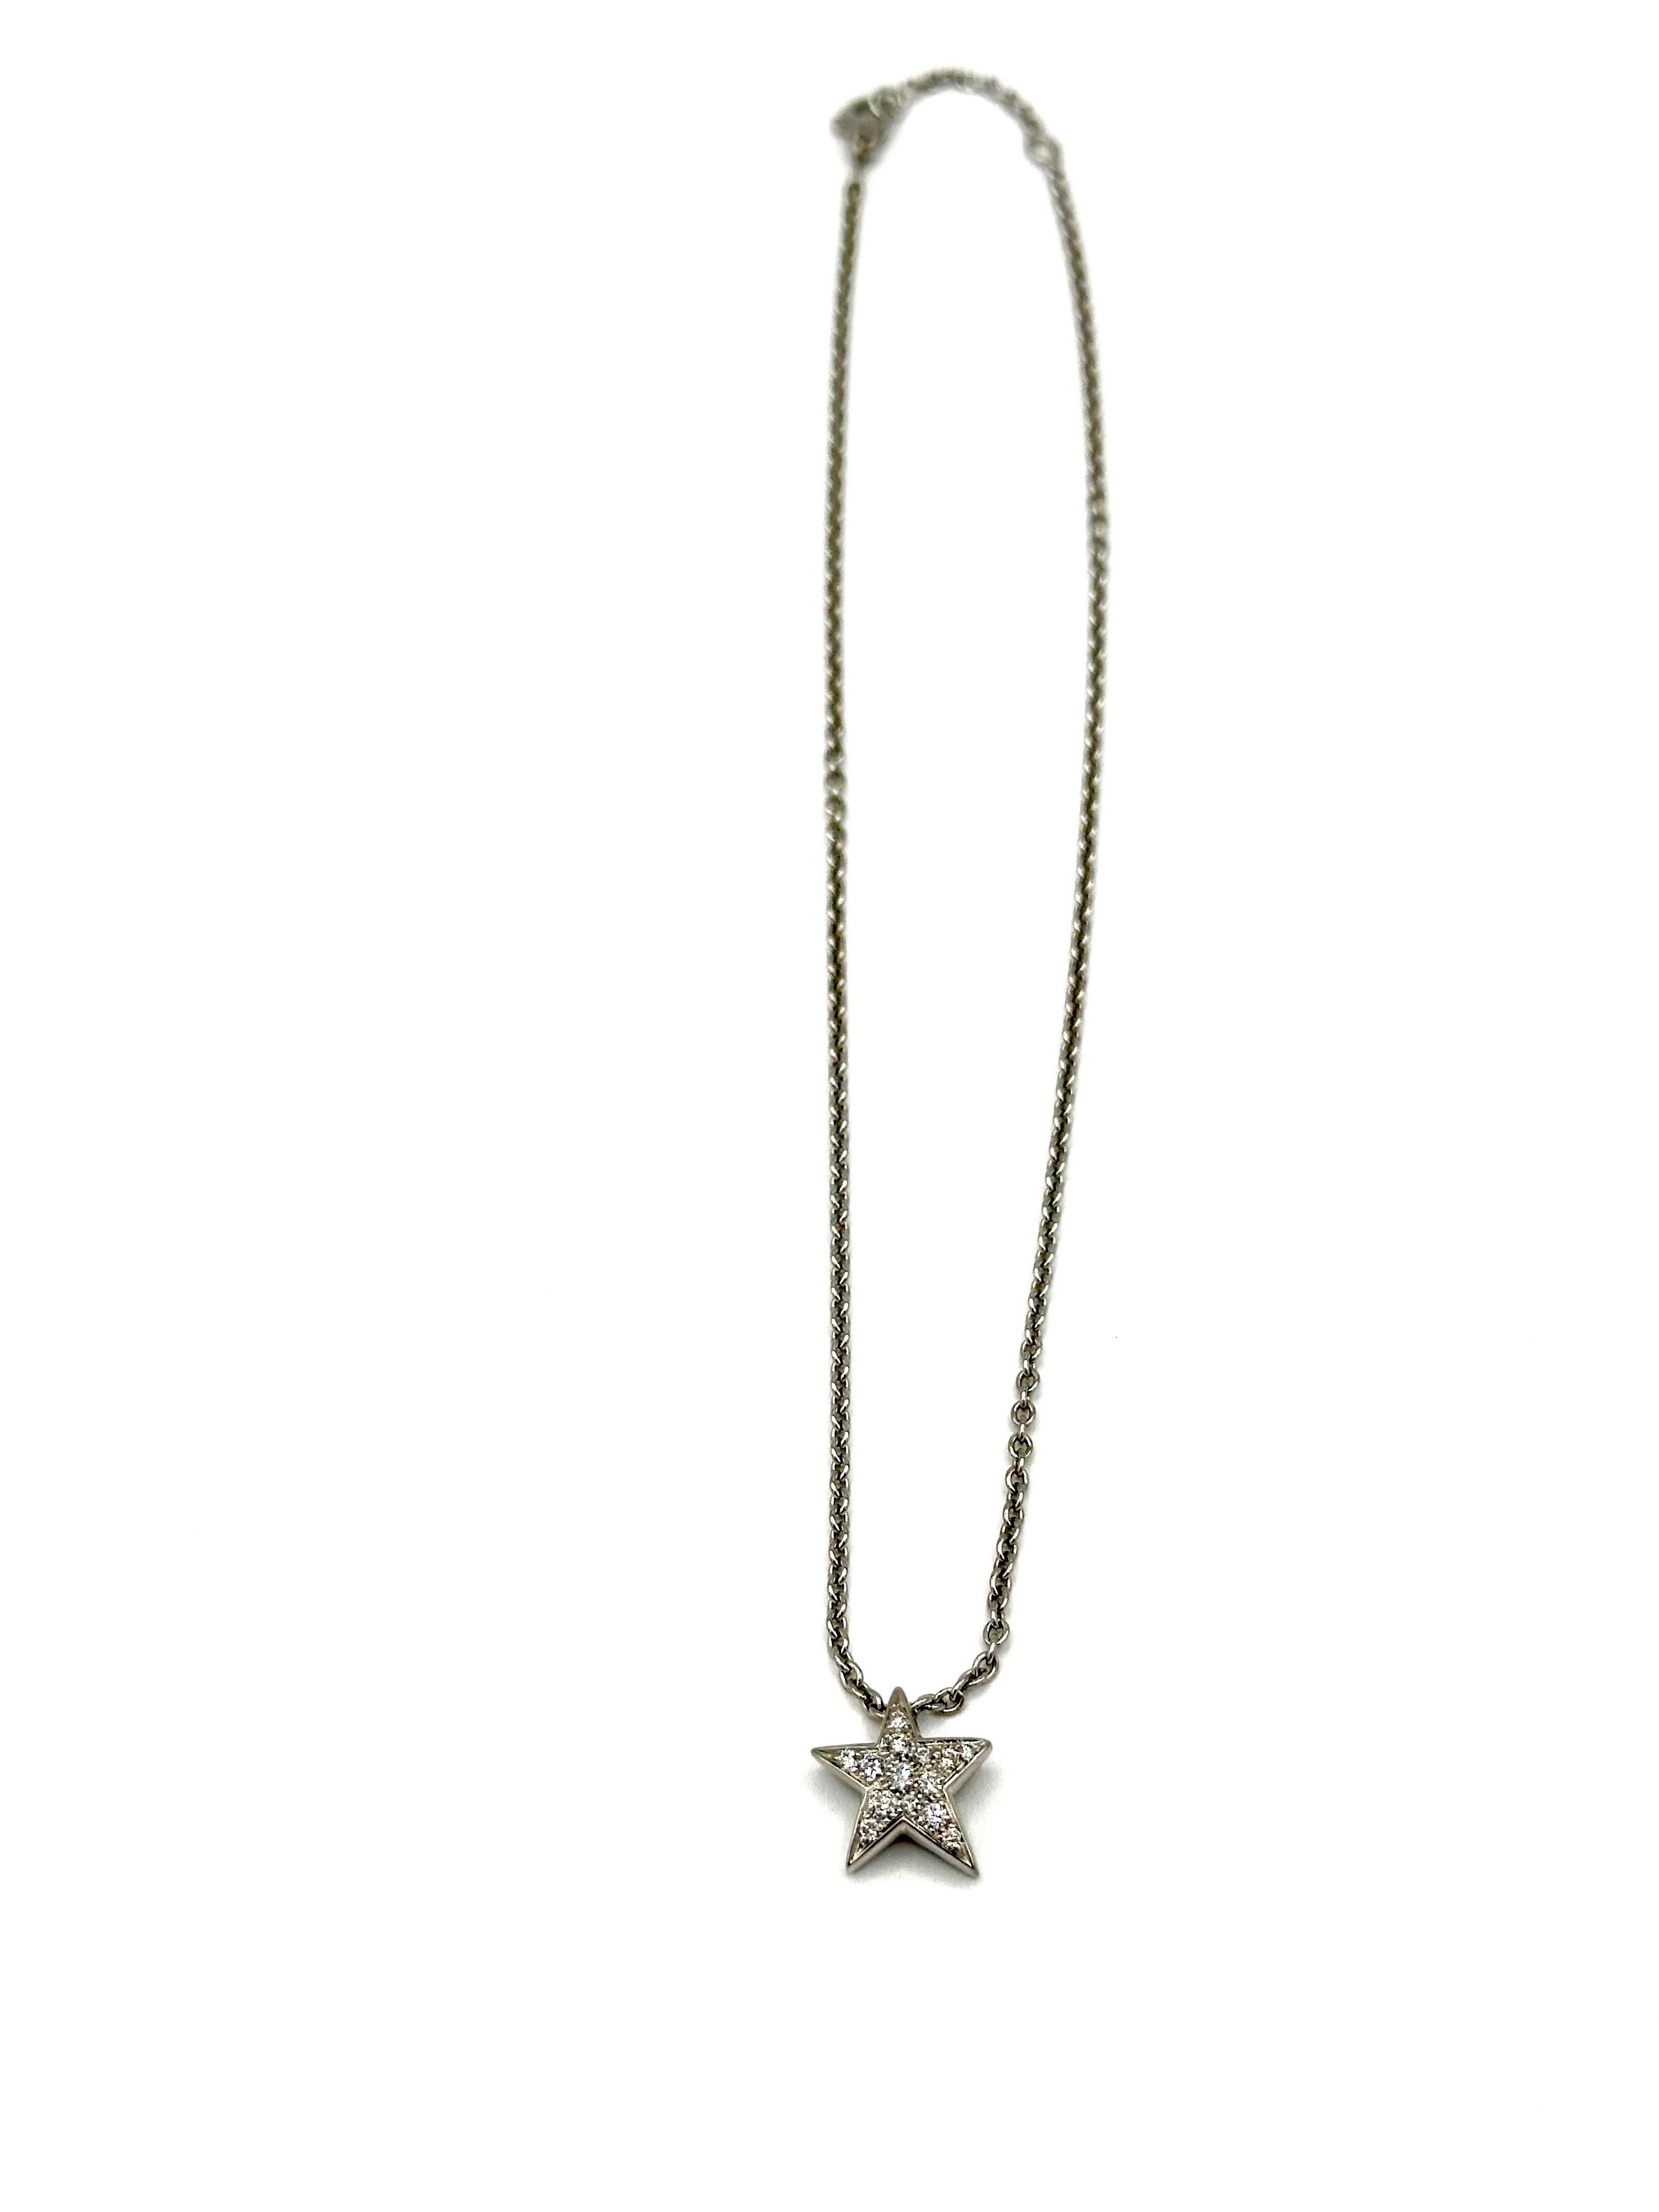 18k White Gold Diamond Comete Star Pendant Necklace by Chanel.
With 14 Diamonds, VVS1 Clarity, F Color. Total Diamond Weight: .30 Carats.  The necklace is 16.00 inches in length.  The Back of the Star is Signed 